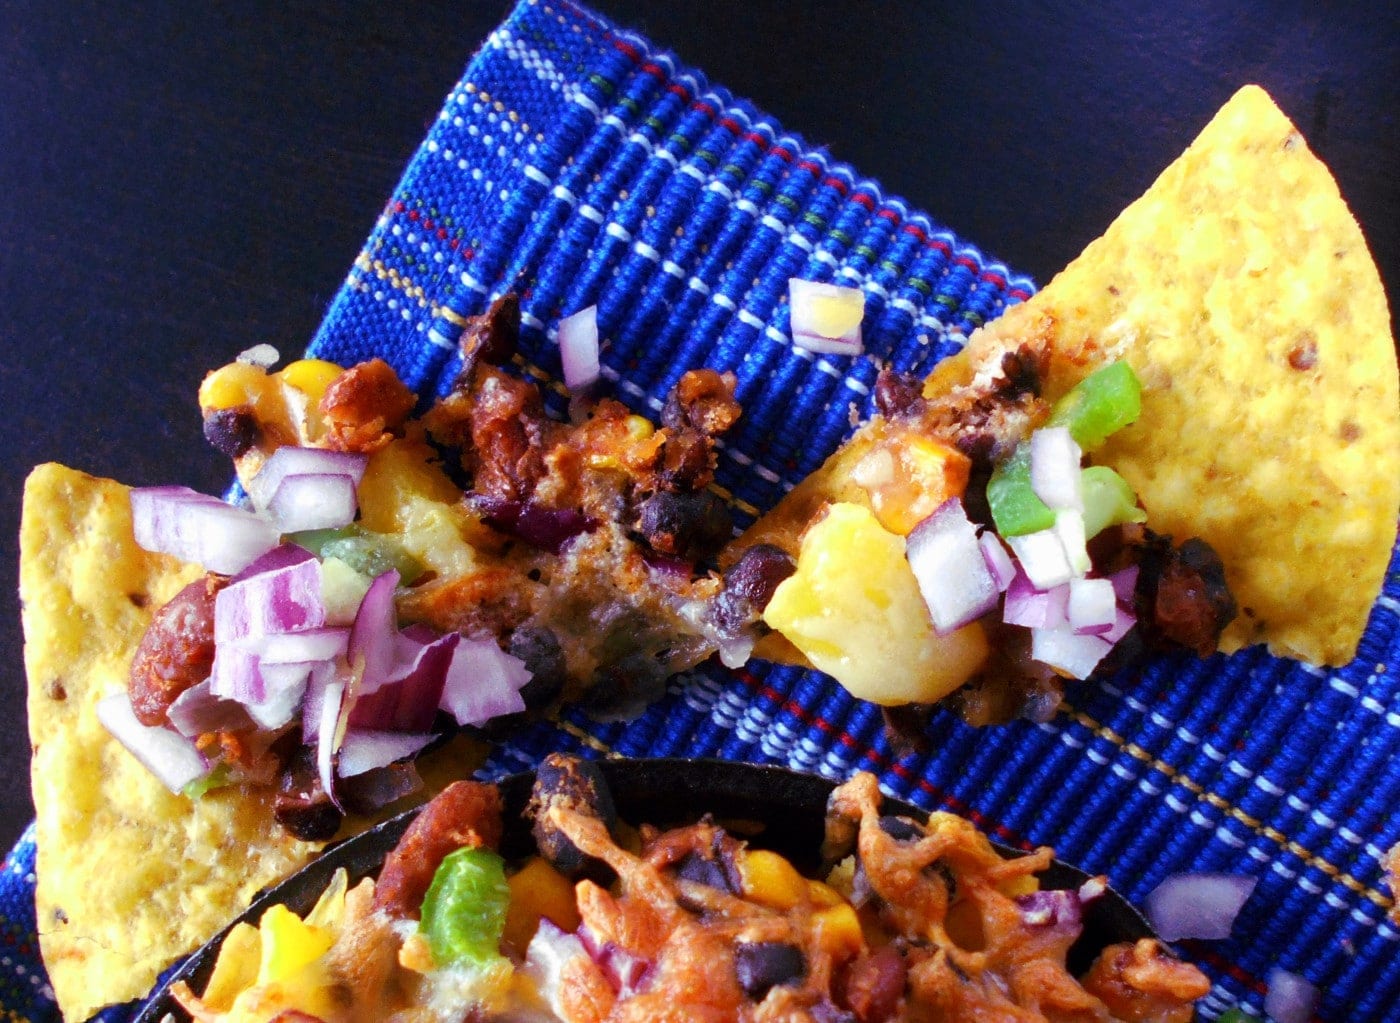 Vegetarian Nachos - Oooey-gooey, cheesy goodness. made with beans, cheese and mangos. Comfort food